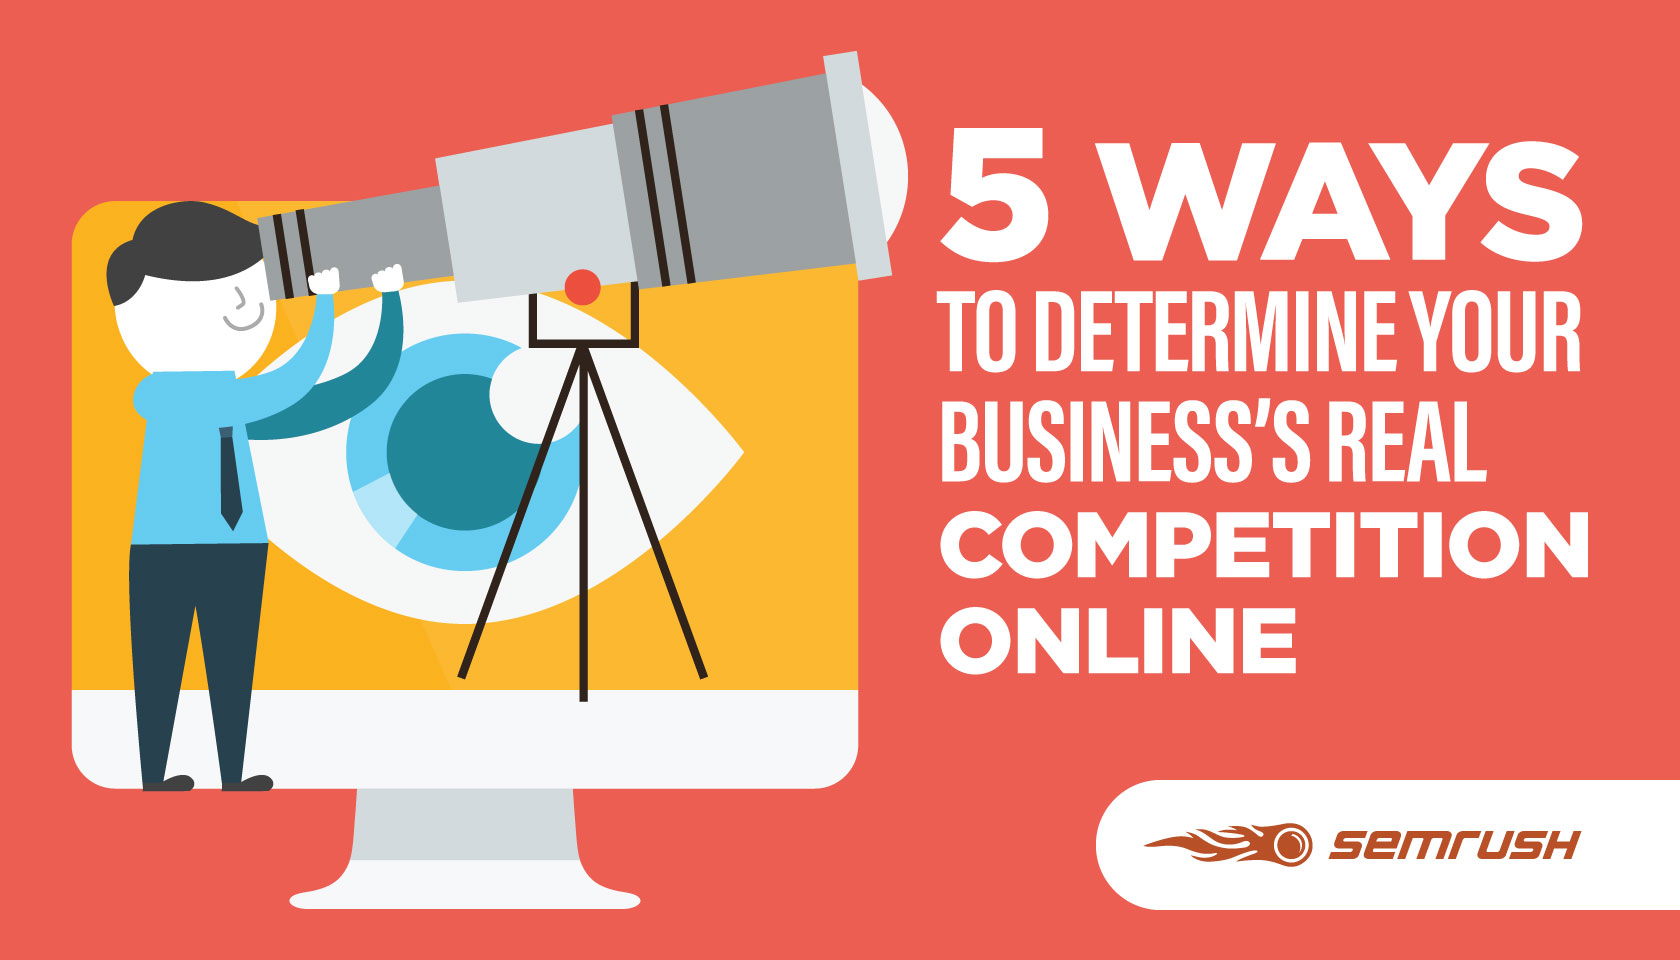 Determine Your Business’s Real Competition Online